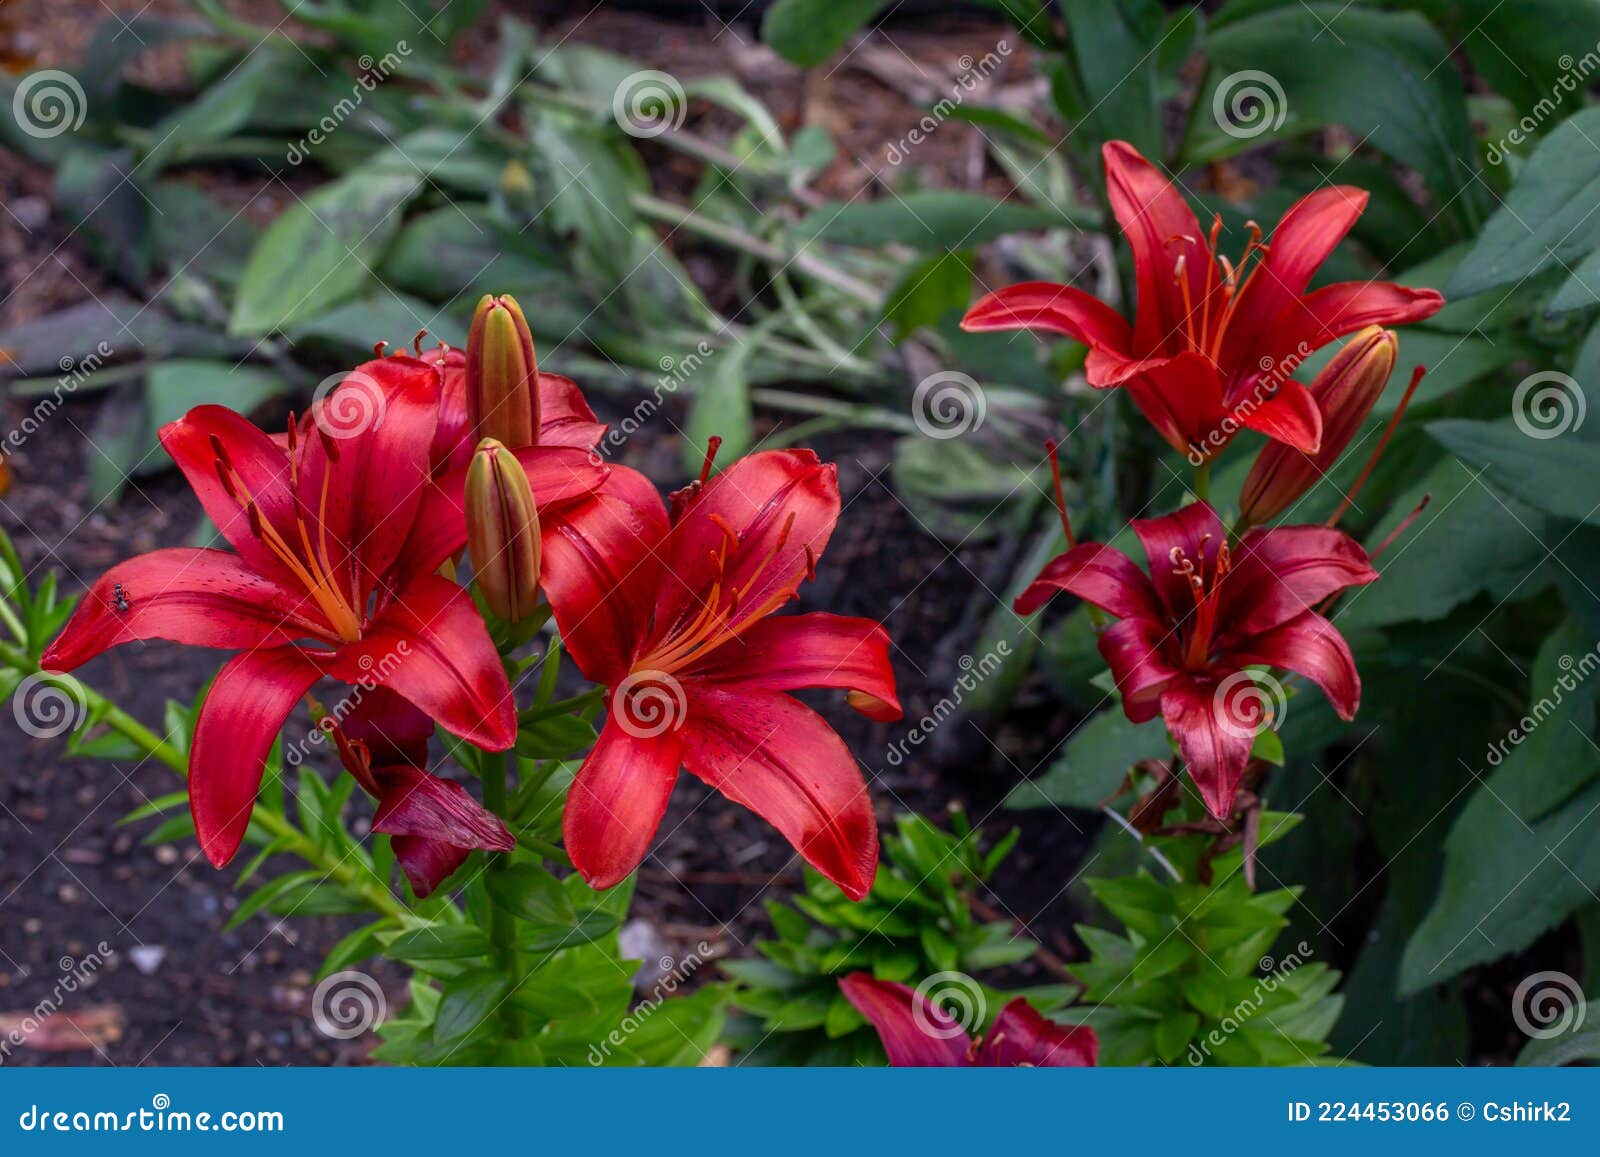 Large Bright Red Flower Blossoms on an Asiatic Lily Plant. Stock Photo -  Image of macro, abstract: 224453066